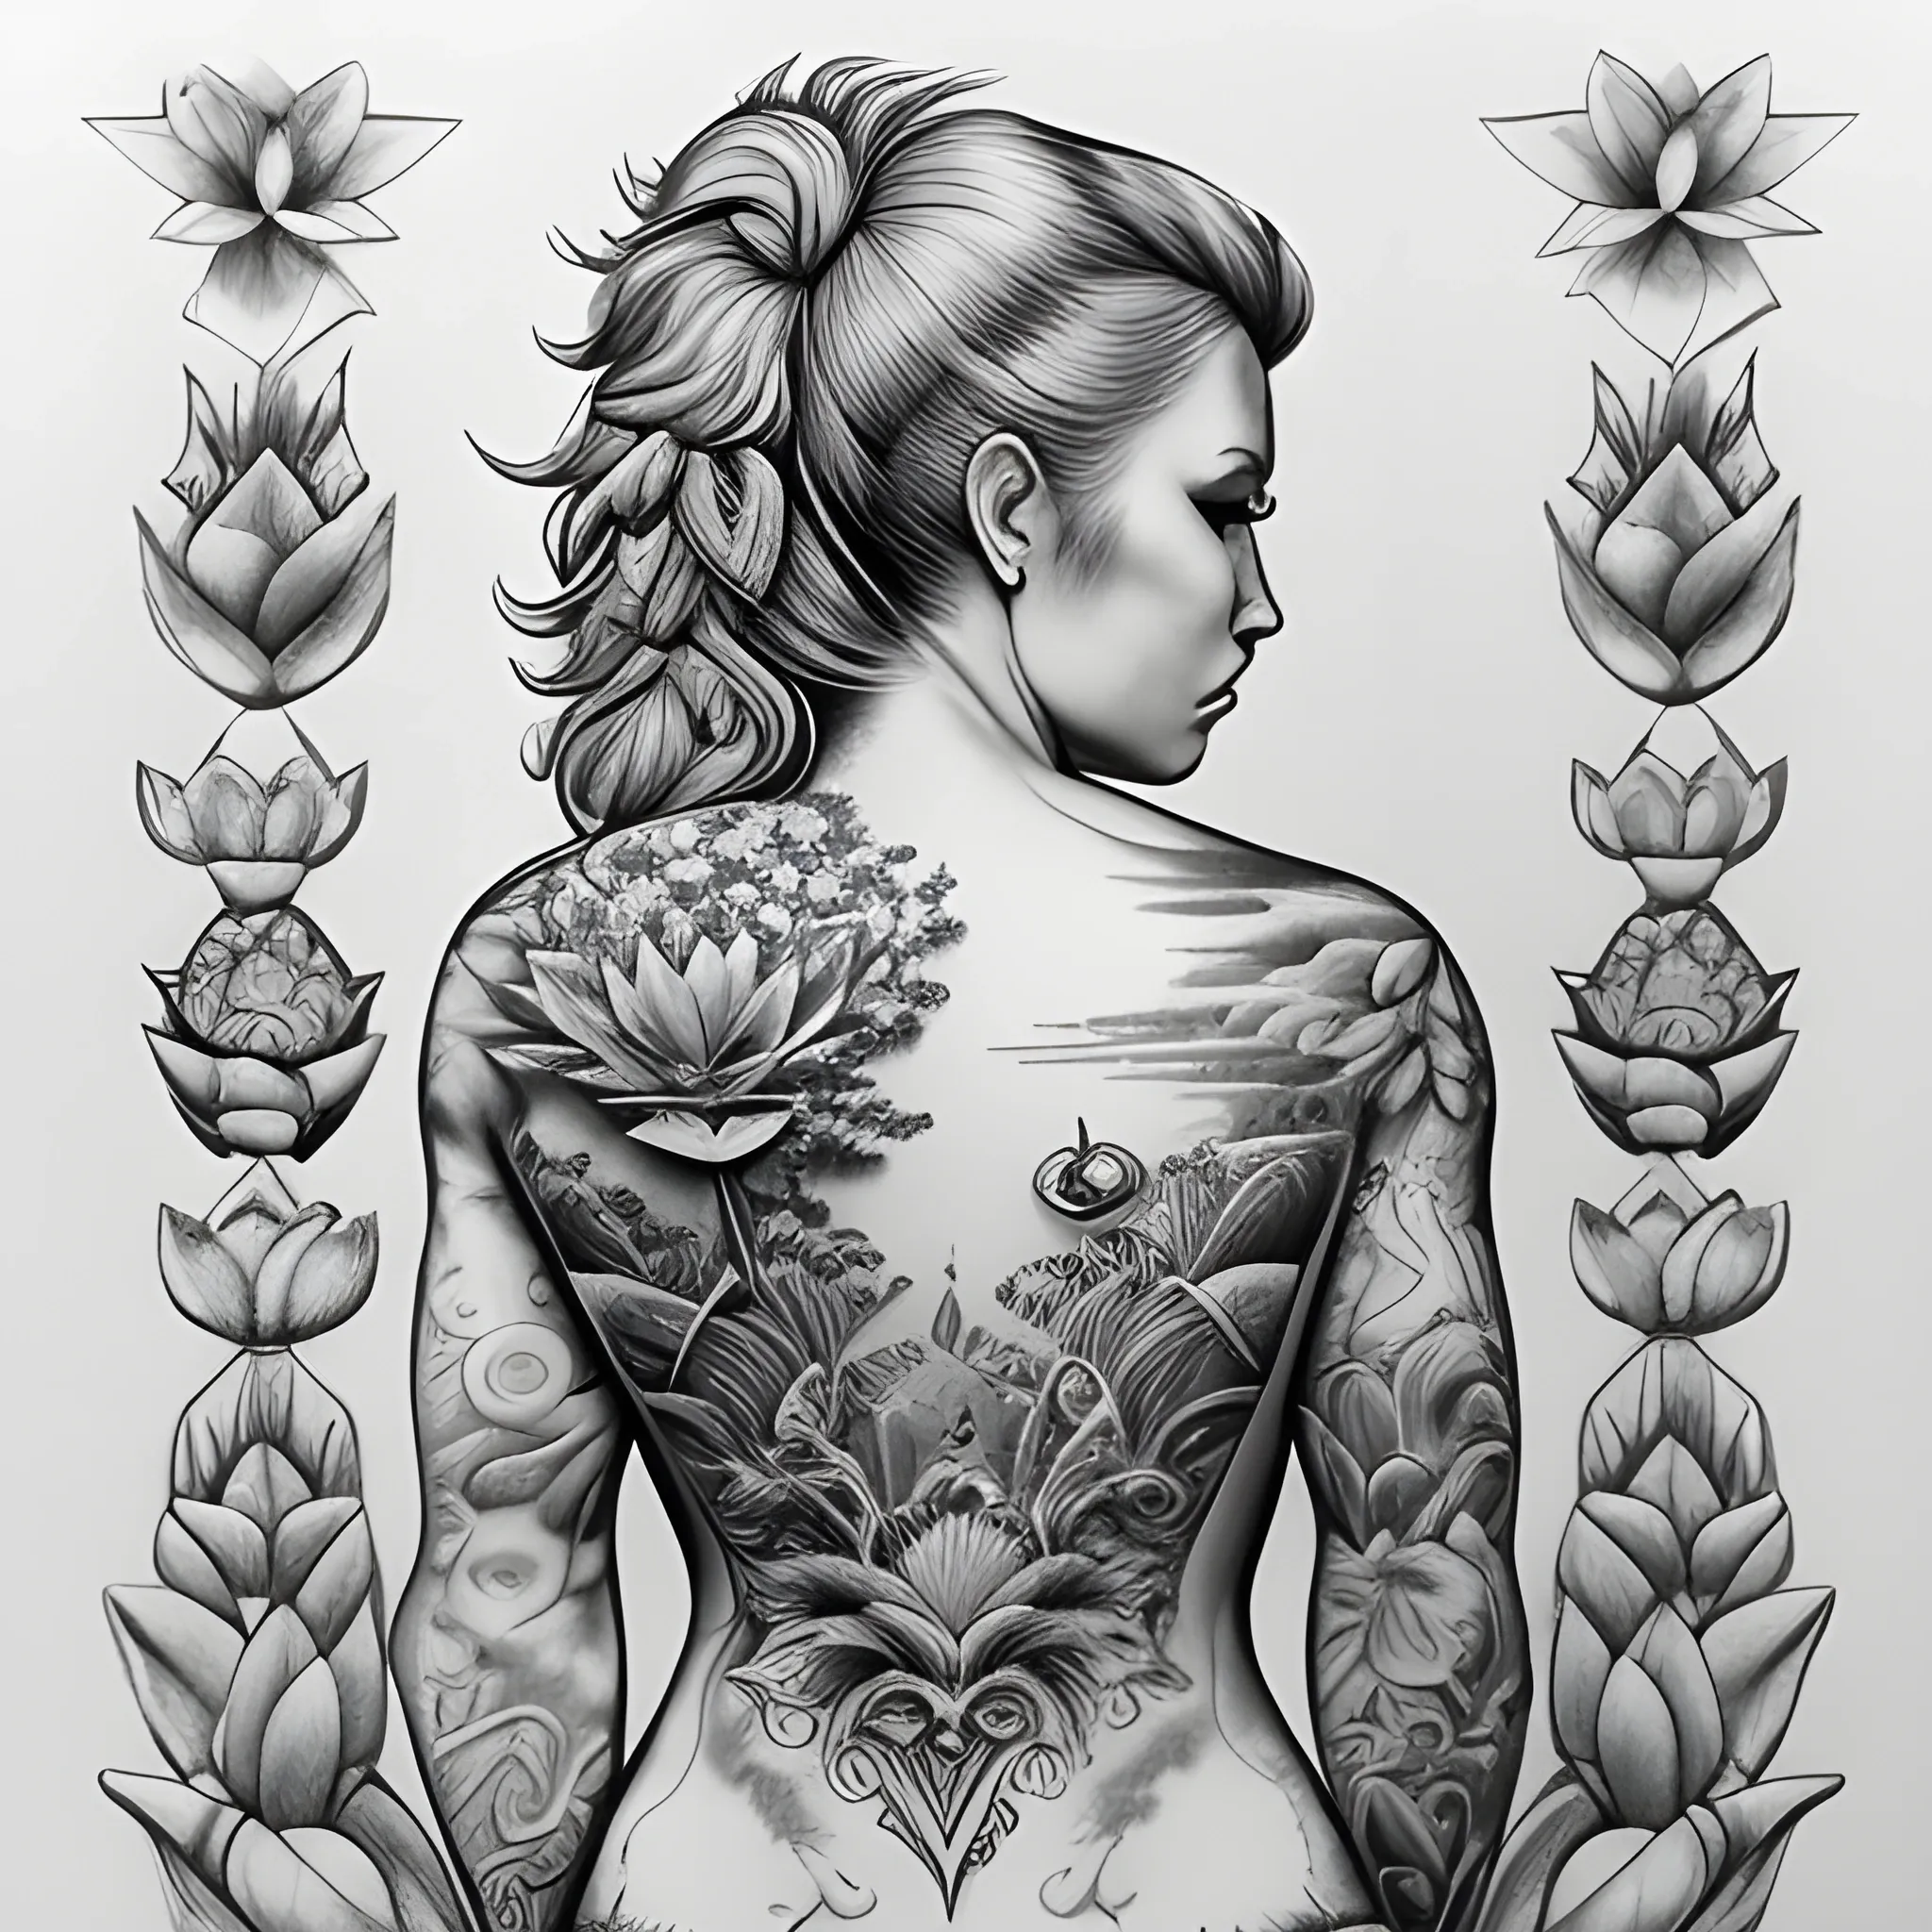 Full back woman tattoo with a lioness, stars, water lily, coi fish, flowers, Pencil Sketch